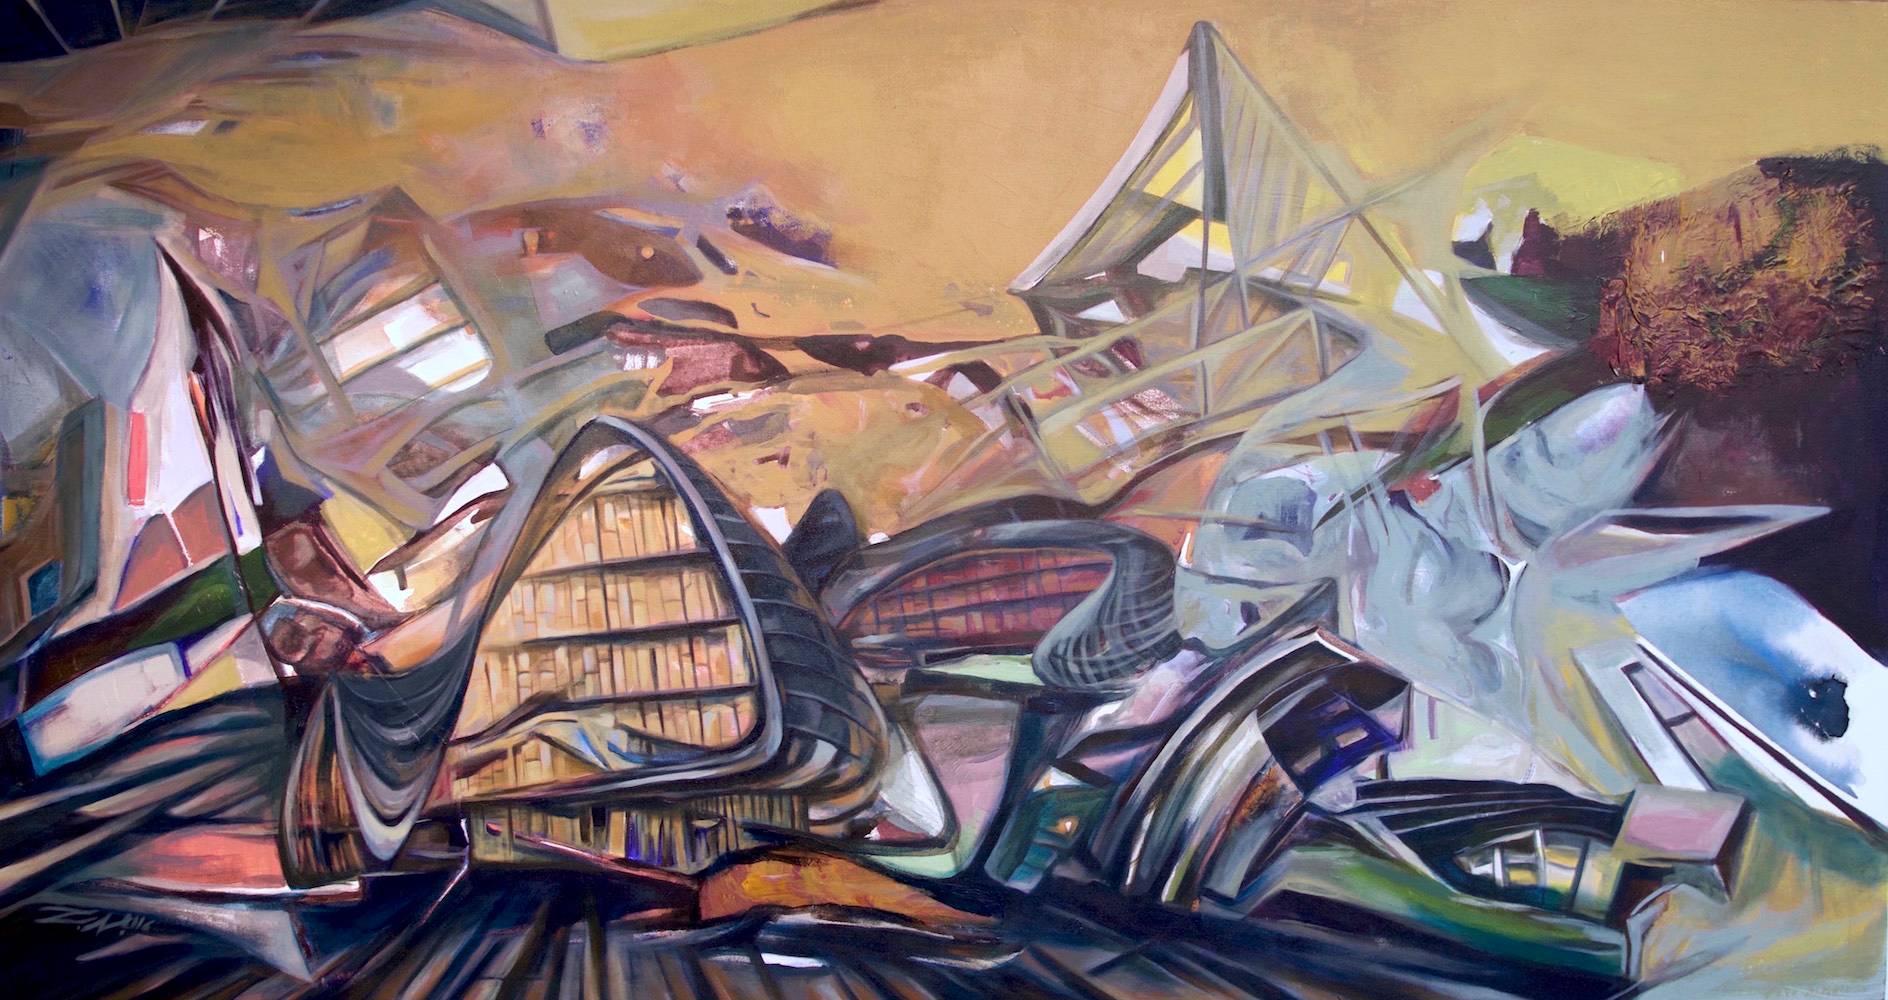 "Urban Landscape" sweeping architecture in pinks and golds  - Painting by Zahra Nazari